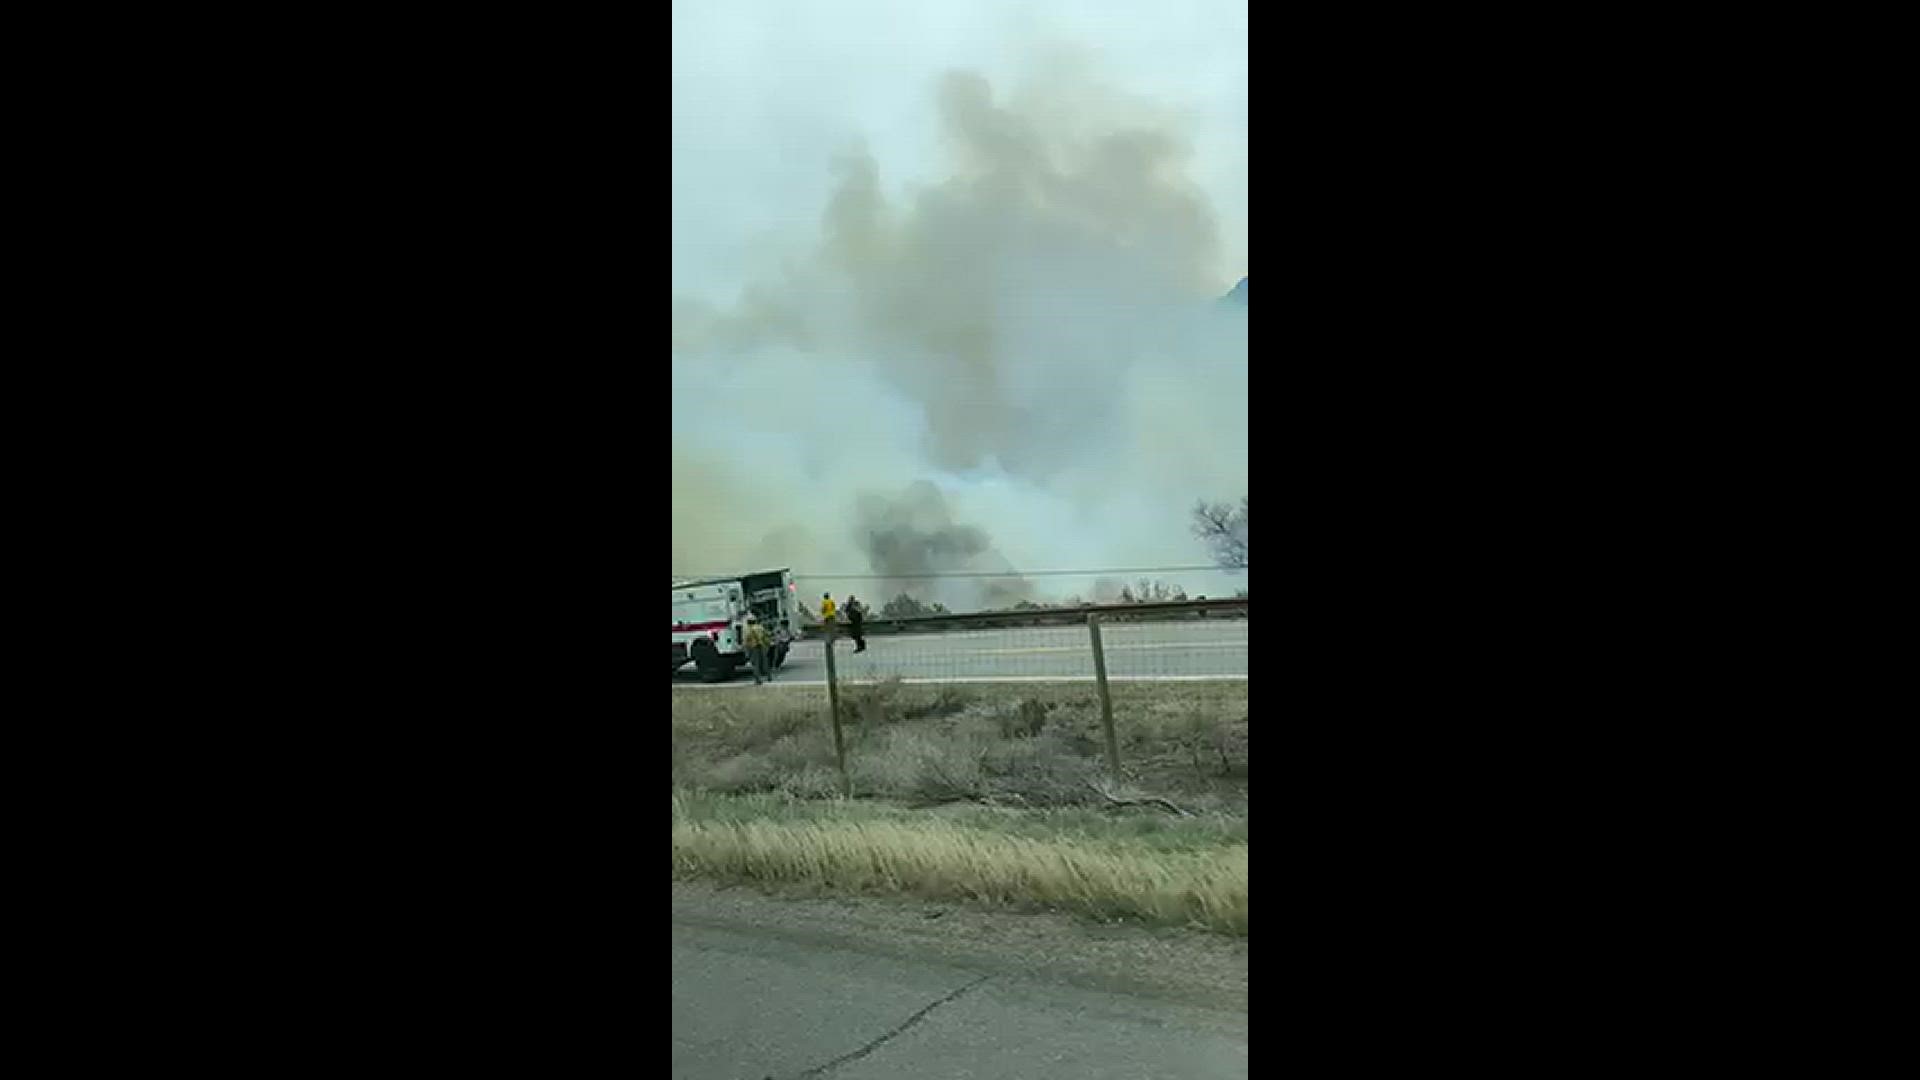 9NEWS viewer Jenna Blatchford sent us this video of the Duck Pond Fire burning next to I-70 near Gypsum.